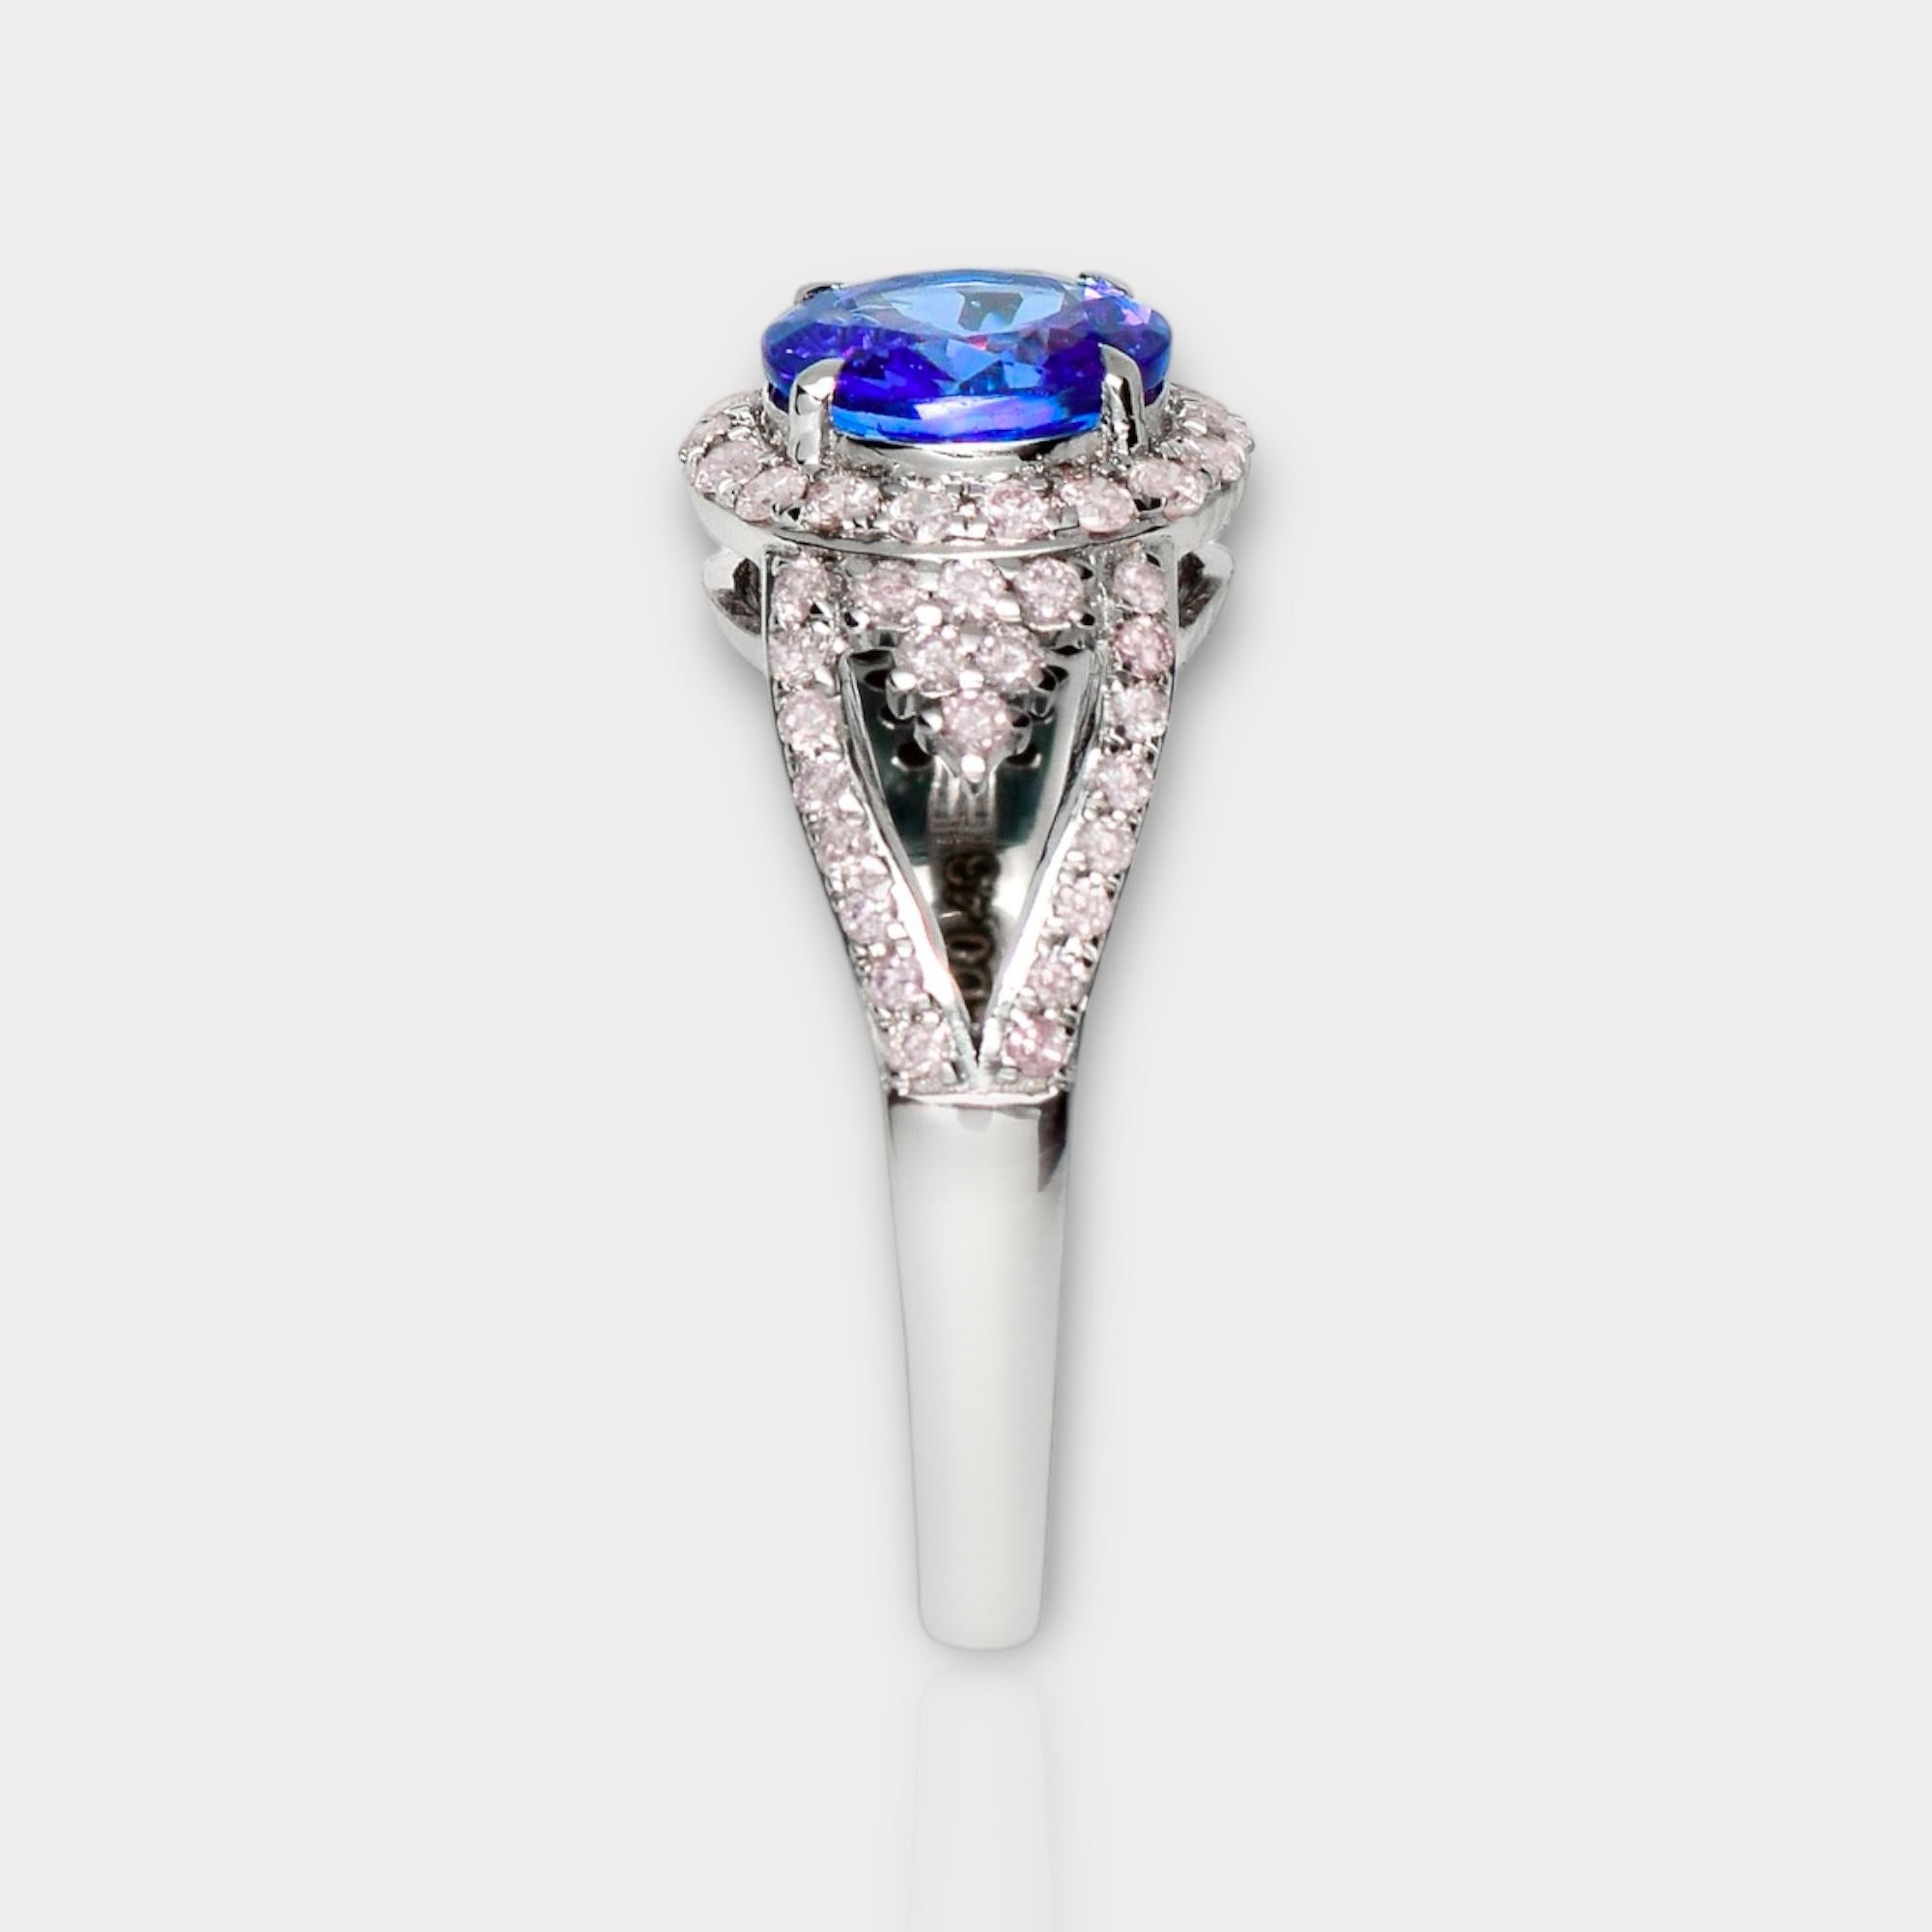 IGI 14K 1.19 ct Tanzanite&Pink Diamond Antique Art Deco Engagement Ring In New Condition For Sale In Kaohsiung City, TW